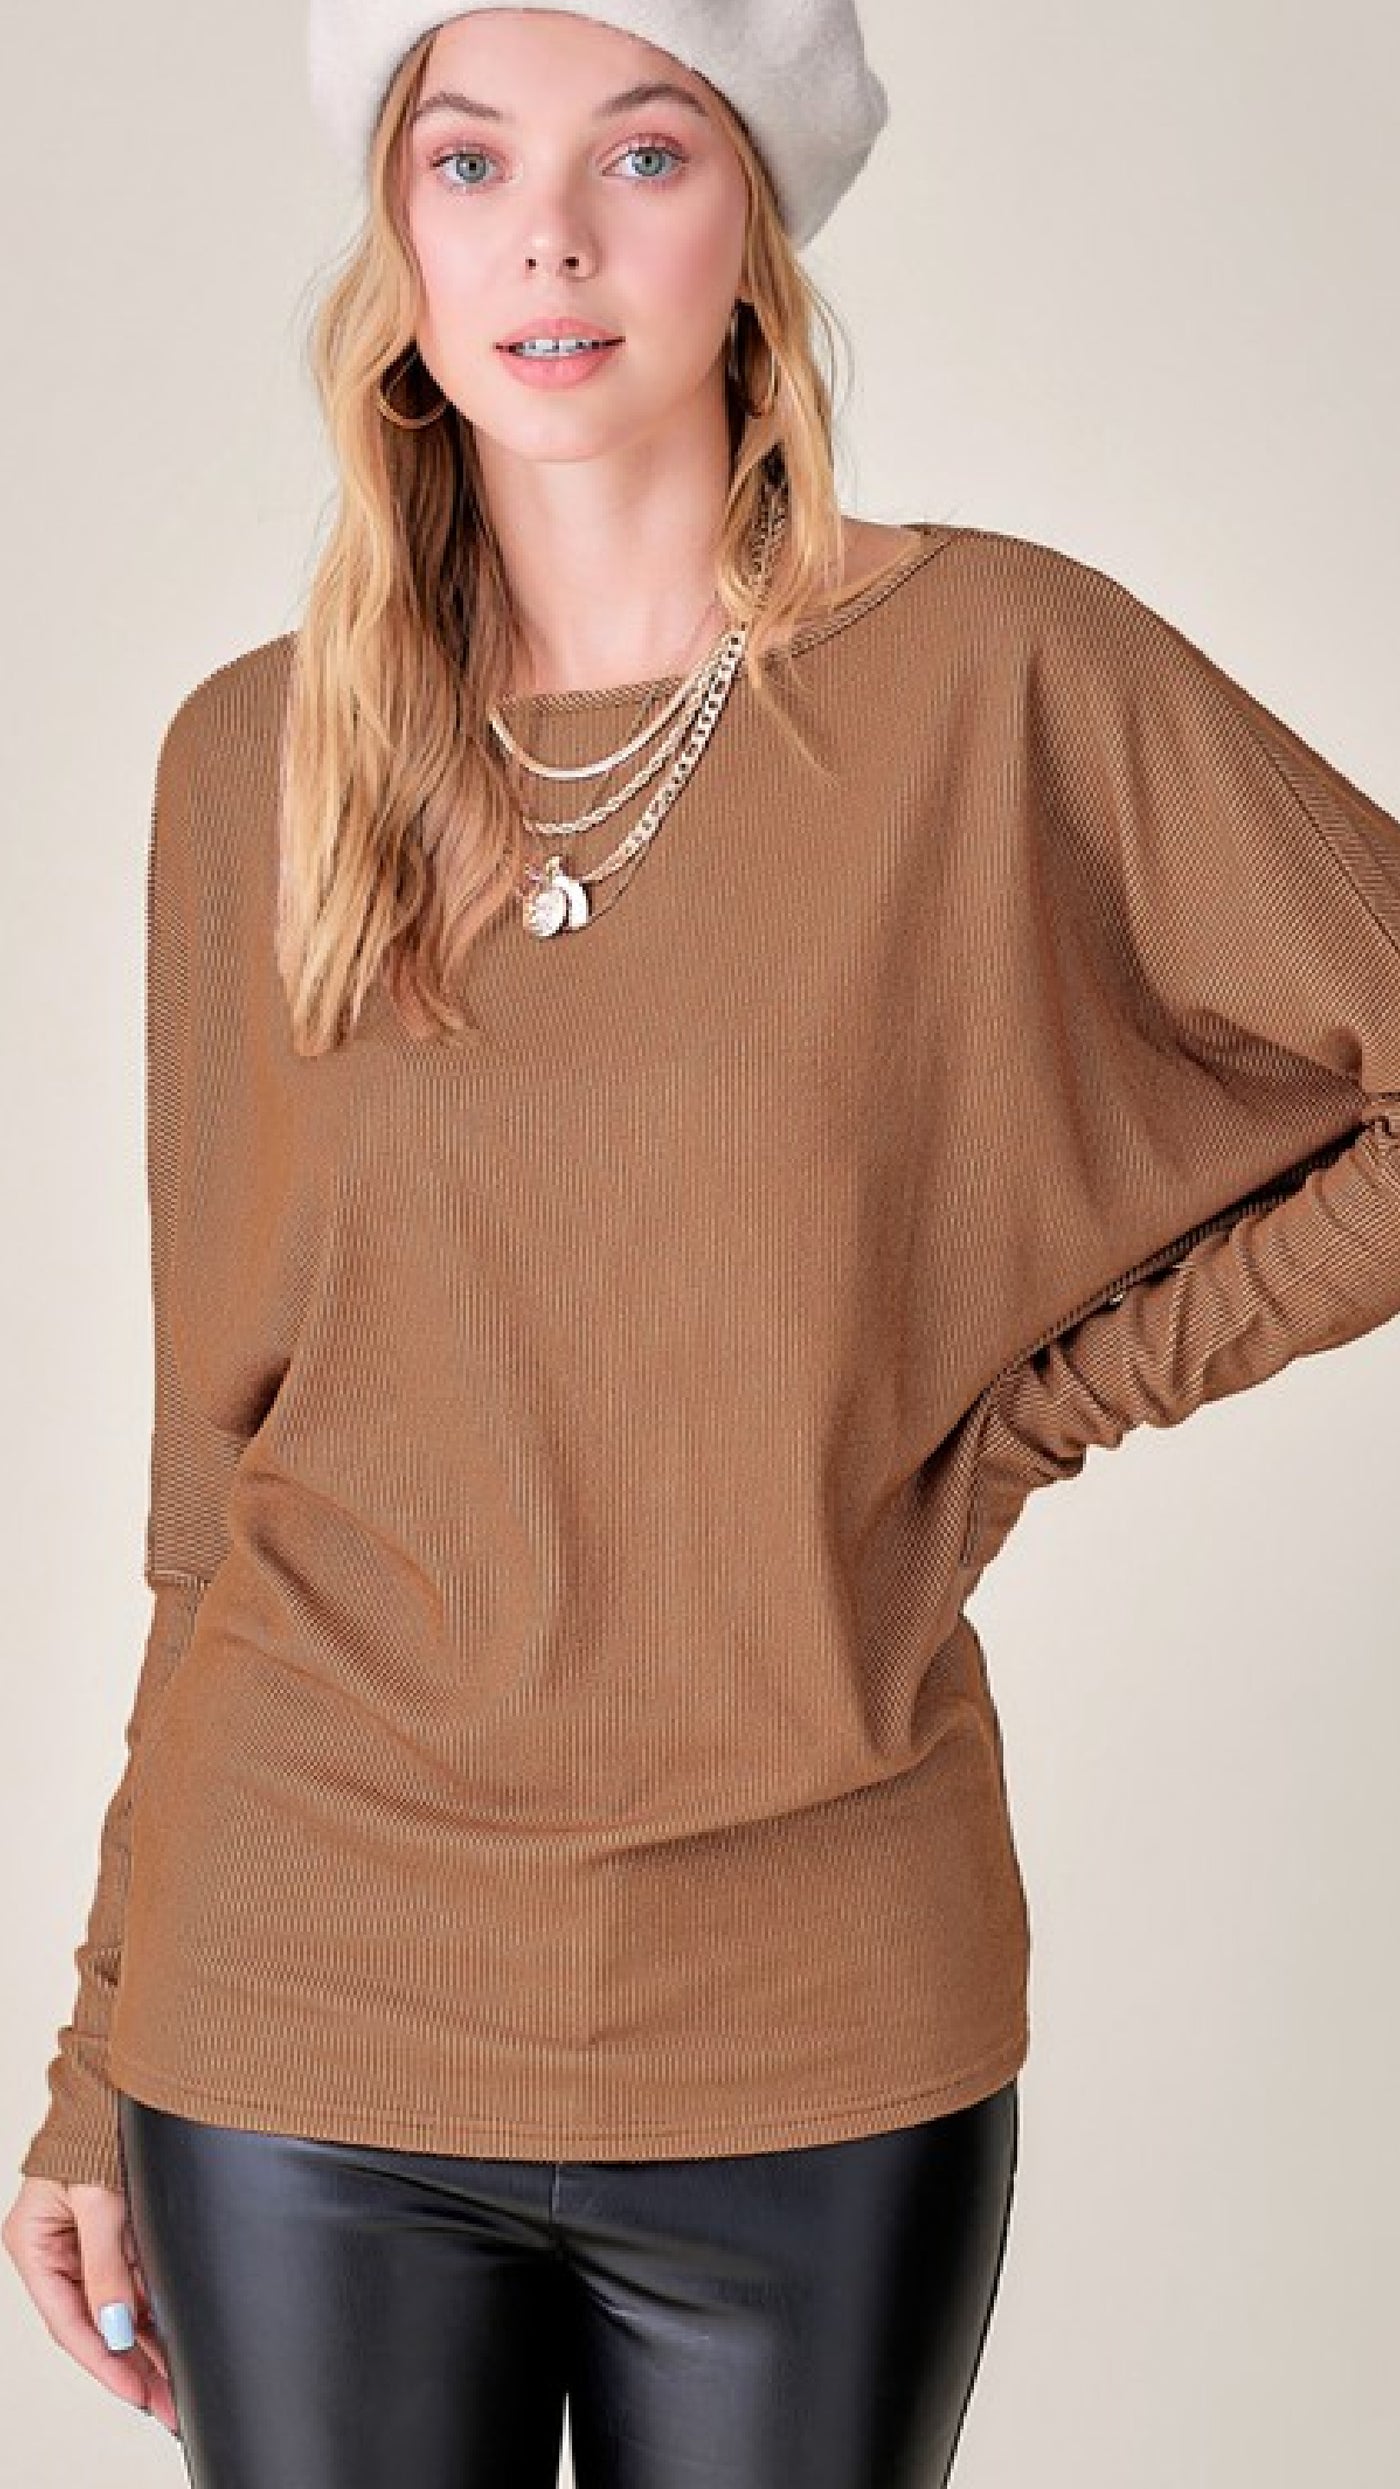 You Know Me Top - Camel - Piper and Hollow Boutique